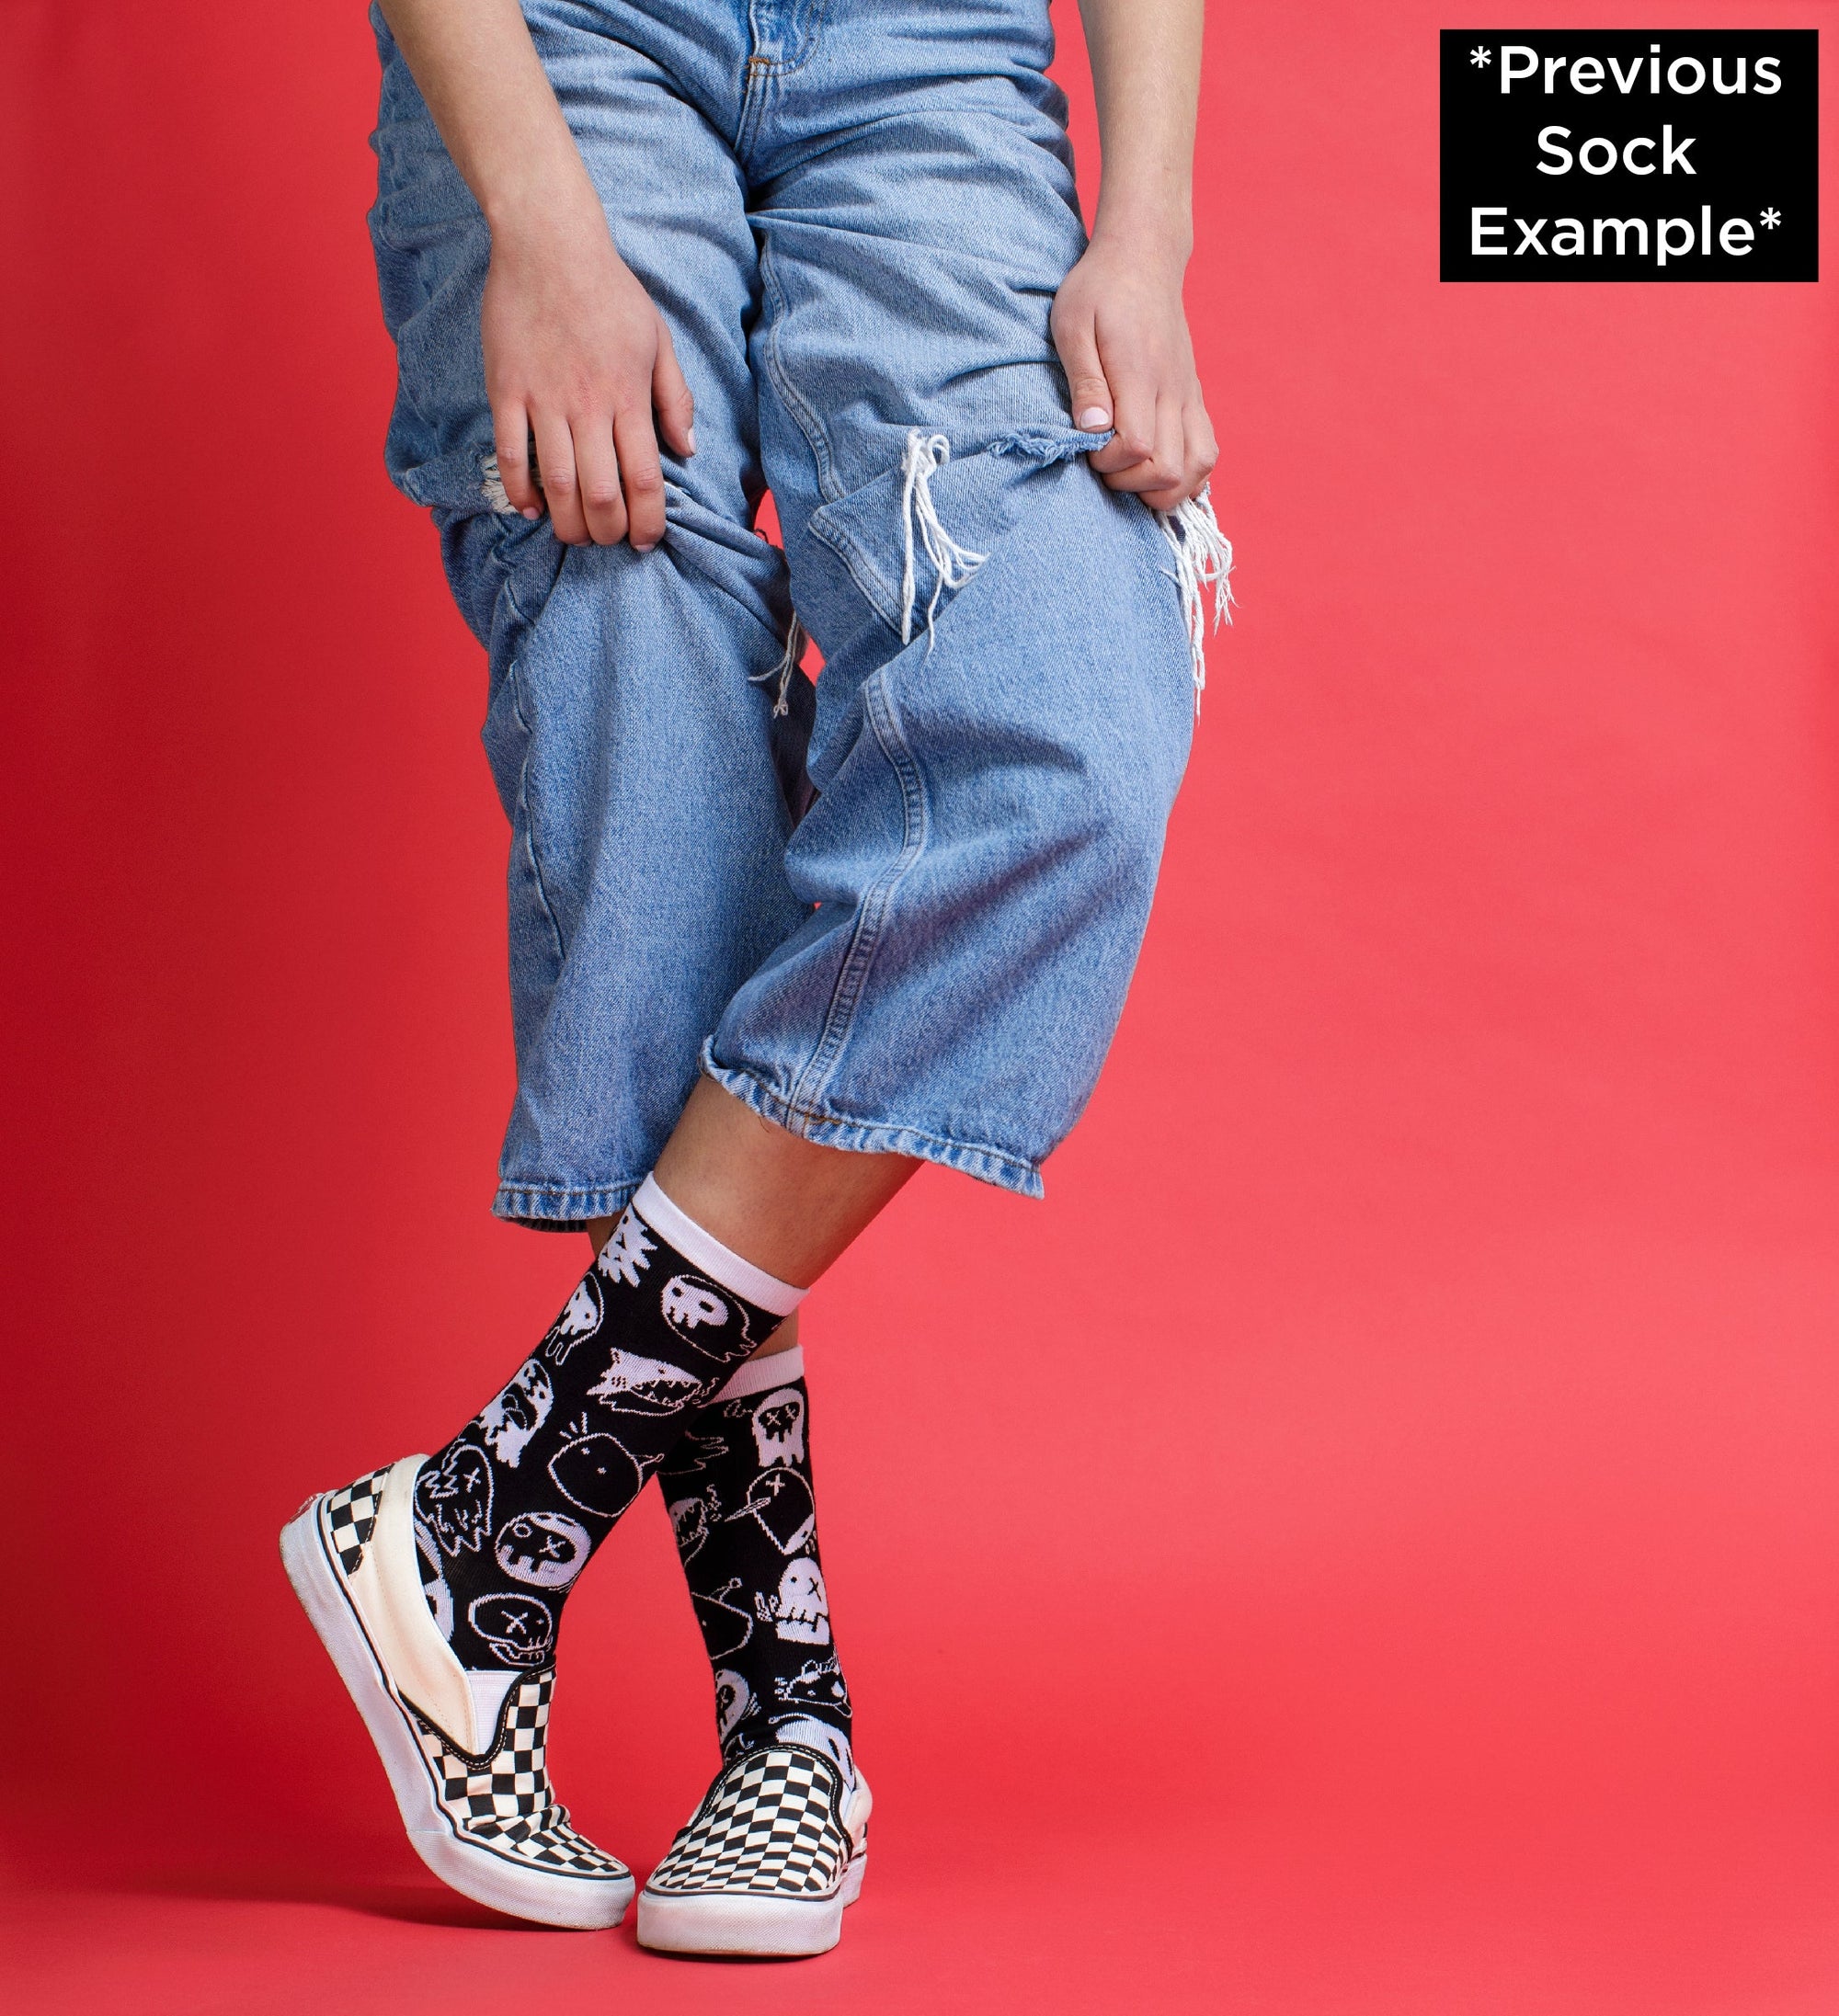 A pair of black and white socks from the Awesome Socks Club with ghost like creatures. Socks are on the feet of someone standing, wearing jeans and crossing their feet, pulling up their pant legs.